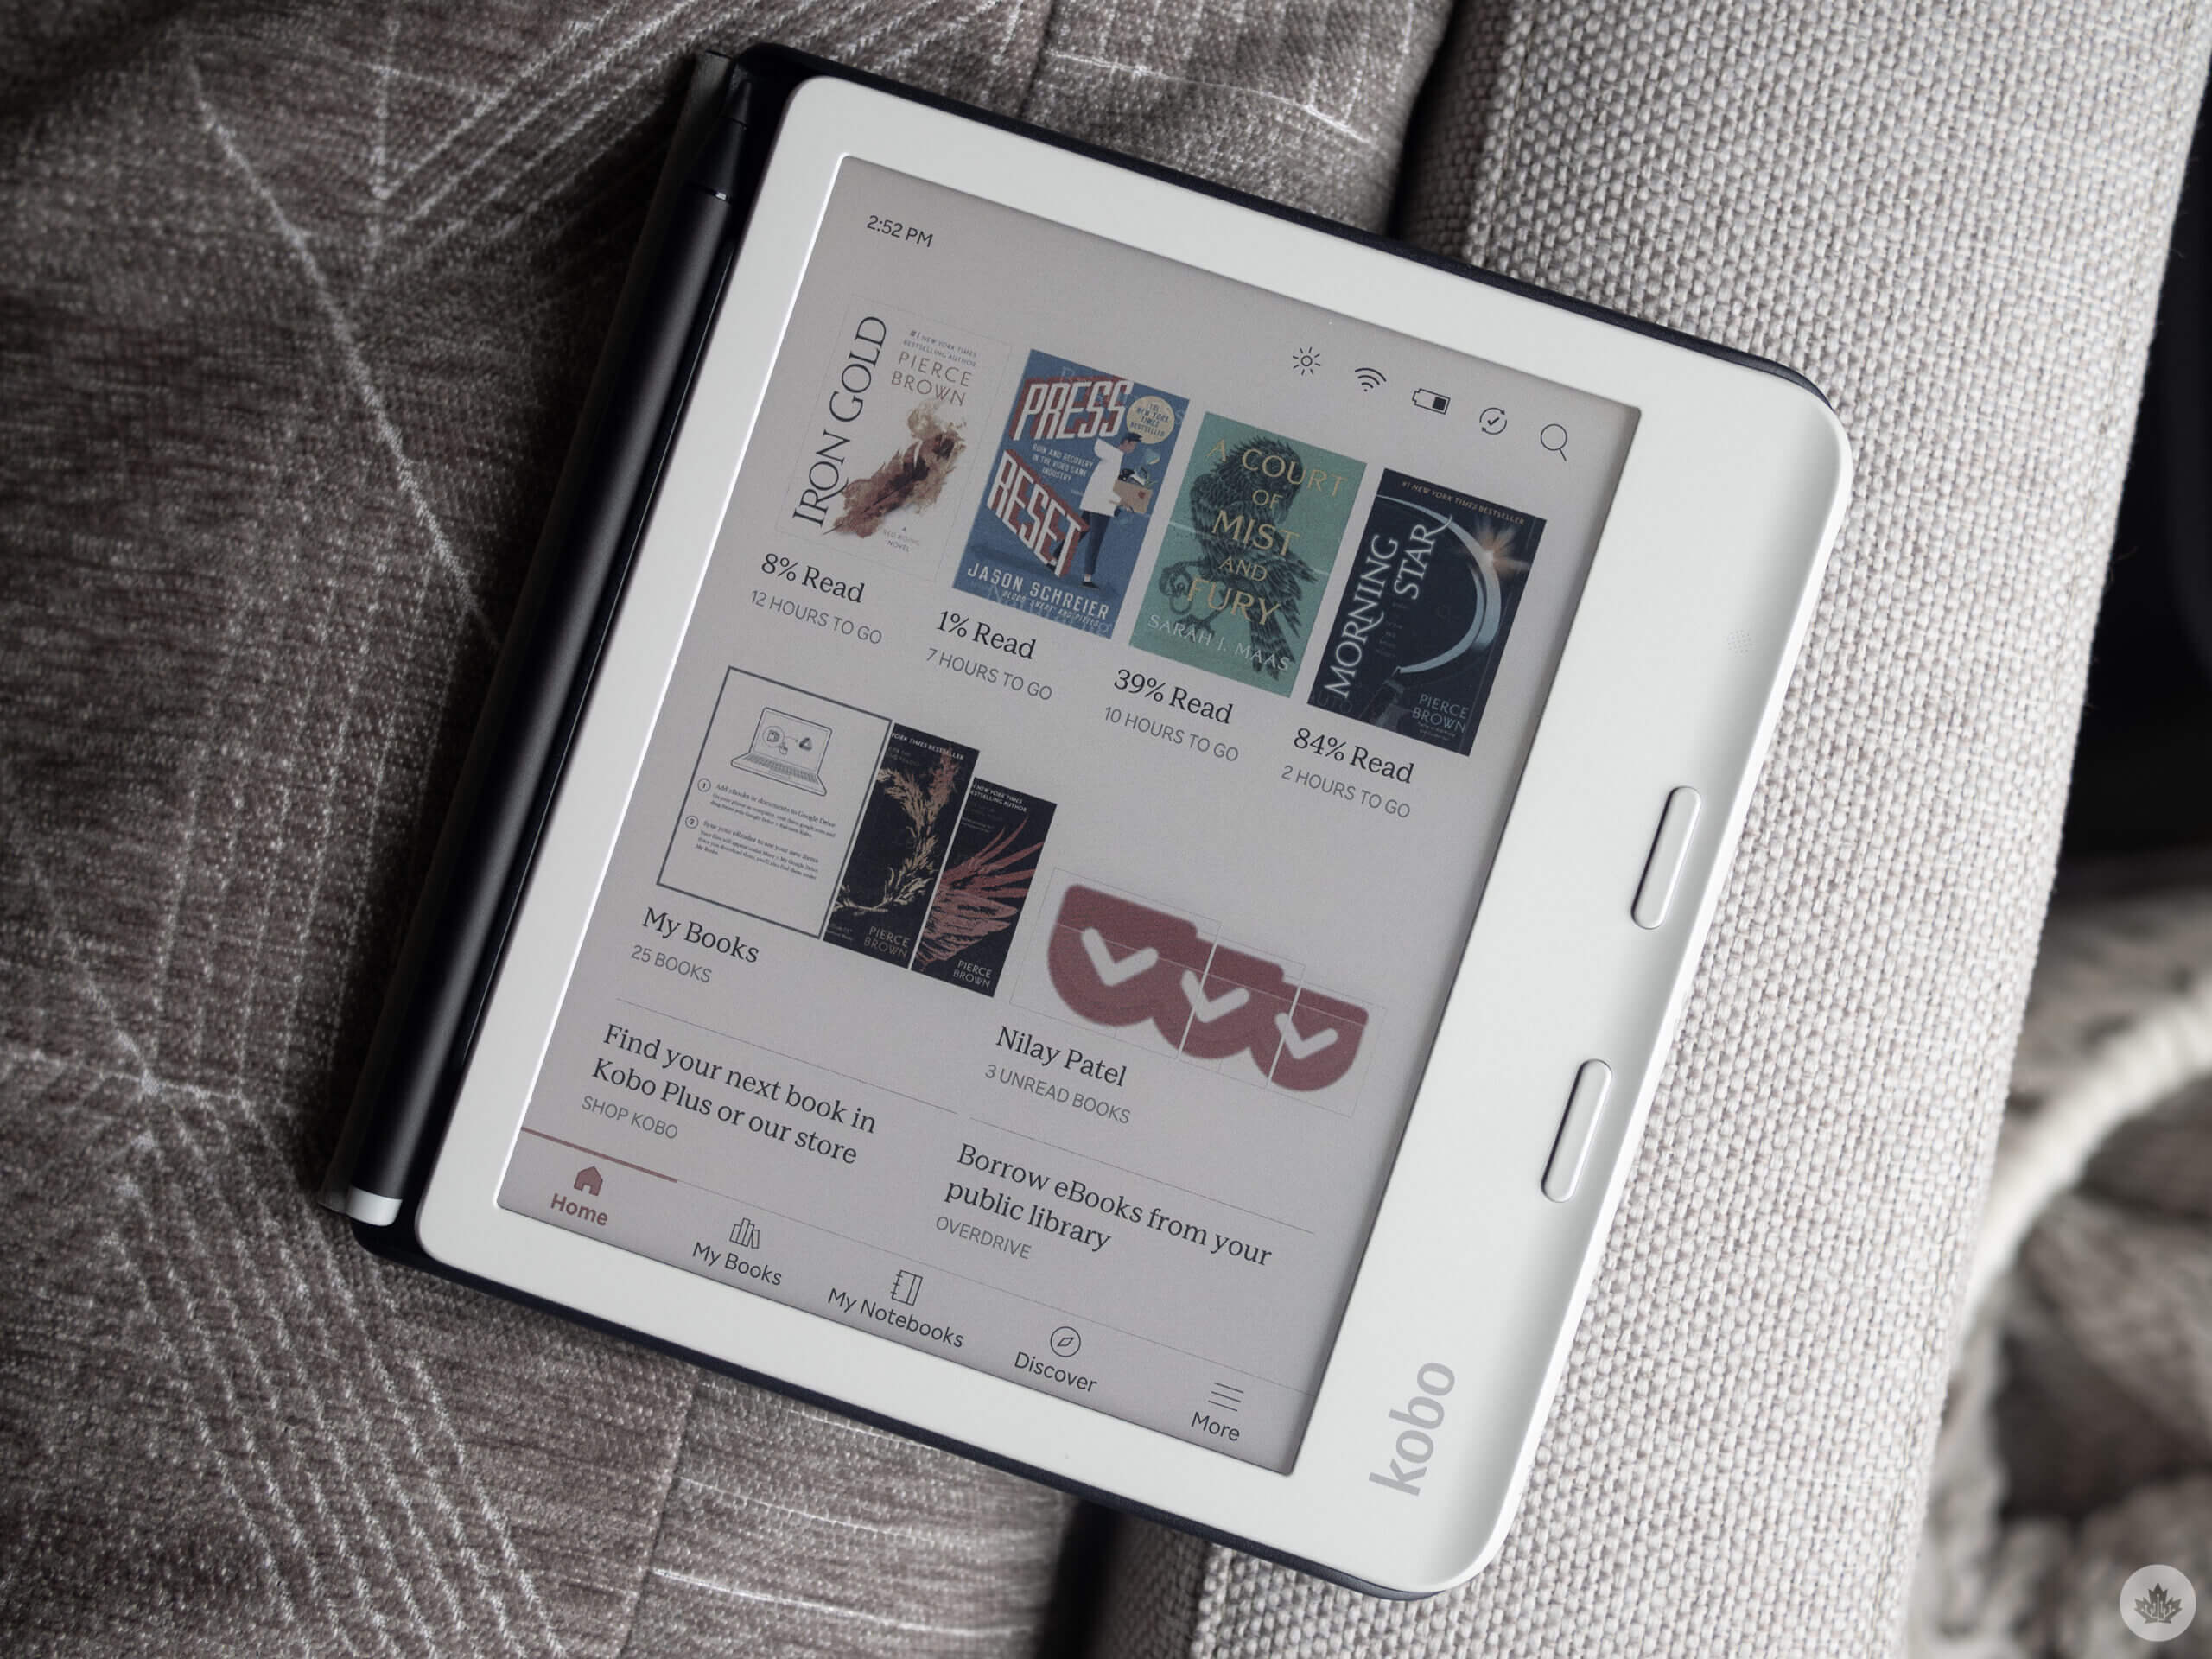 E Ink anticipating higher sales as demand for color e-readers - Good e ...